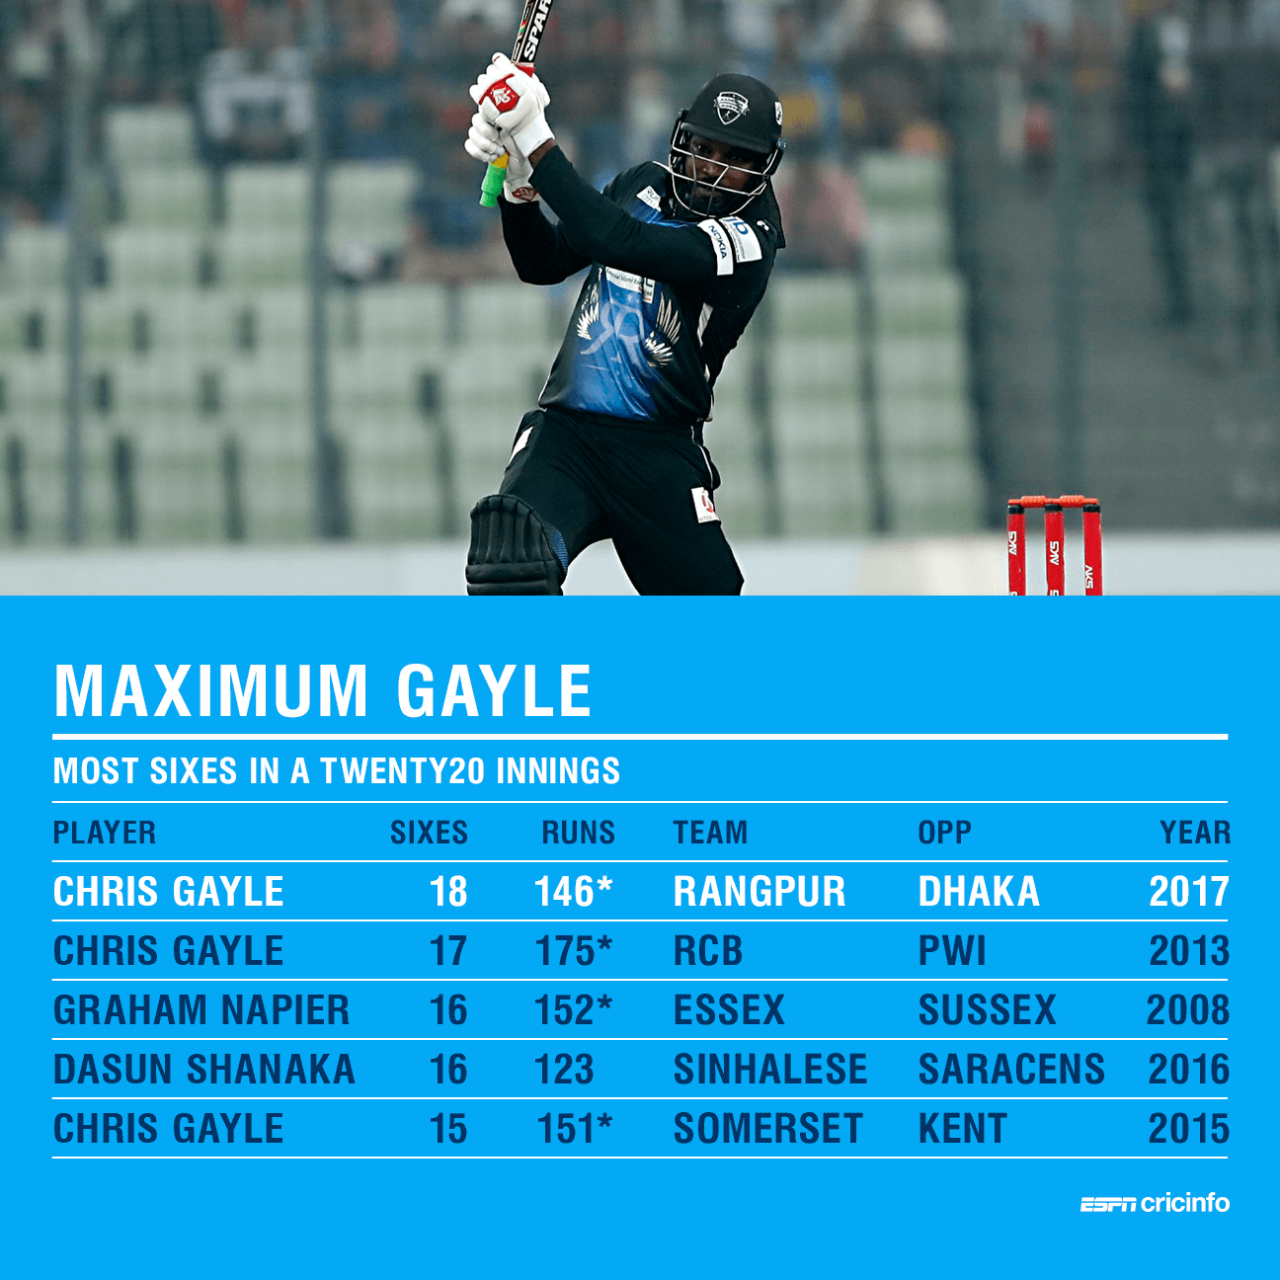 Chris Gayle struck 18 sixes in his unbeaten 146, the most by any batsman in a T20 innings, December 12, 2017